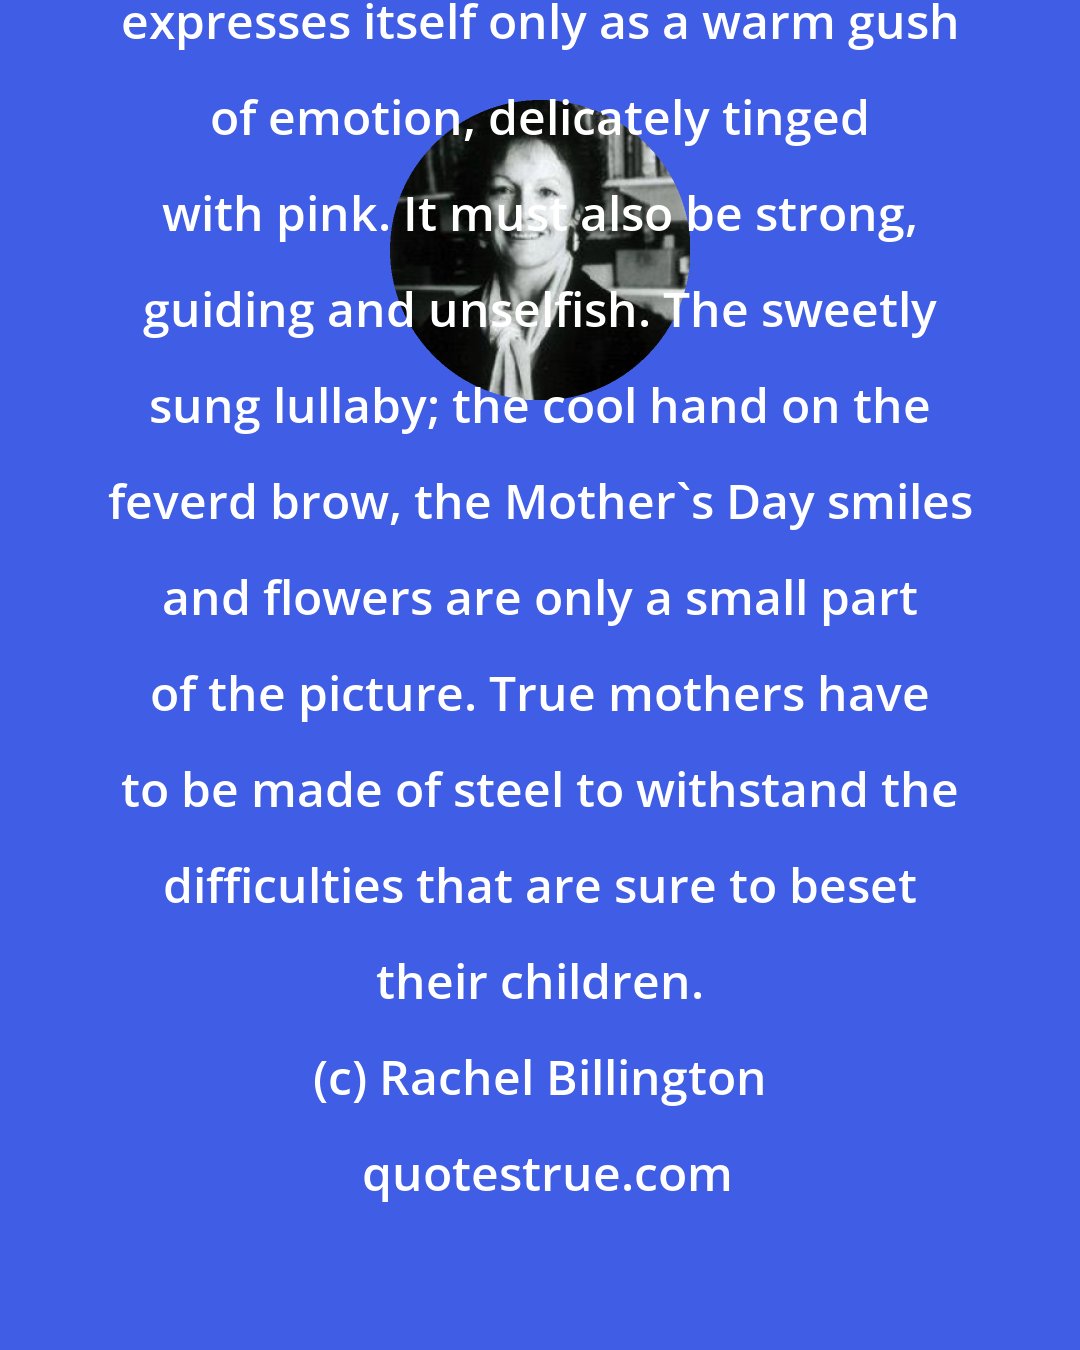 Rachel Billington: Motherly love is not much use if it expresses itself only as a warm gush of emotion, delicately tinged with pink. It must also be strong, guiding and unselfish. The sweetly sung lullaby; the cool hand on the feverd brow, the Mother's Day smiles and flowers are only a small part of the picture. True mothers have to be made of steel to withstand the difficulties that are sure to beset their children.